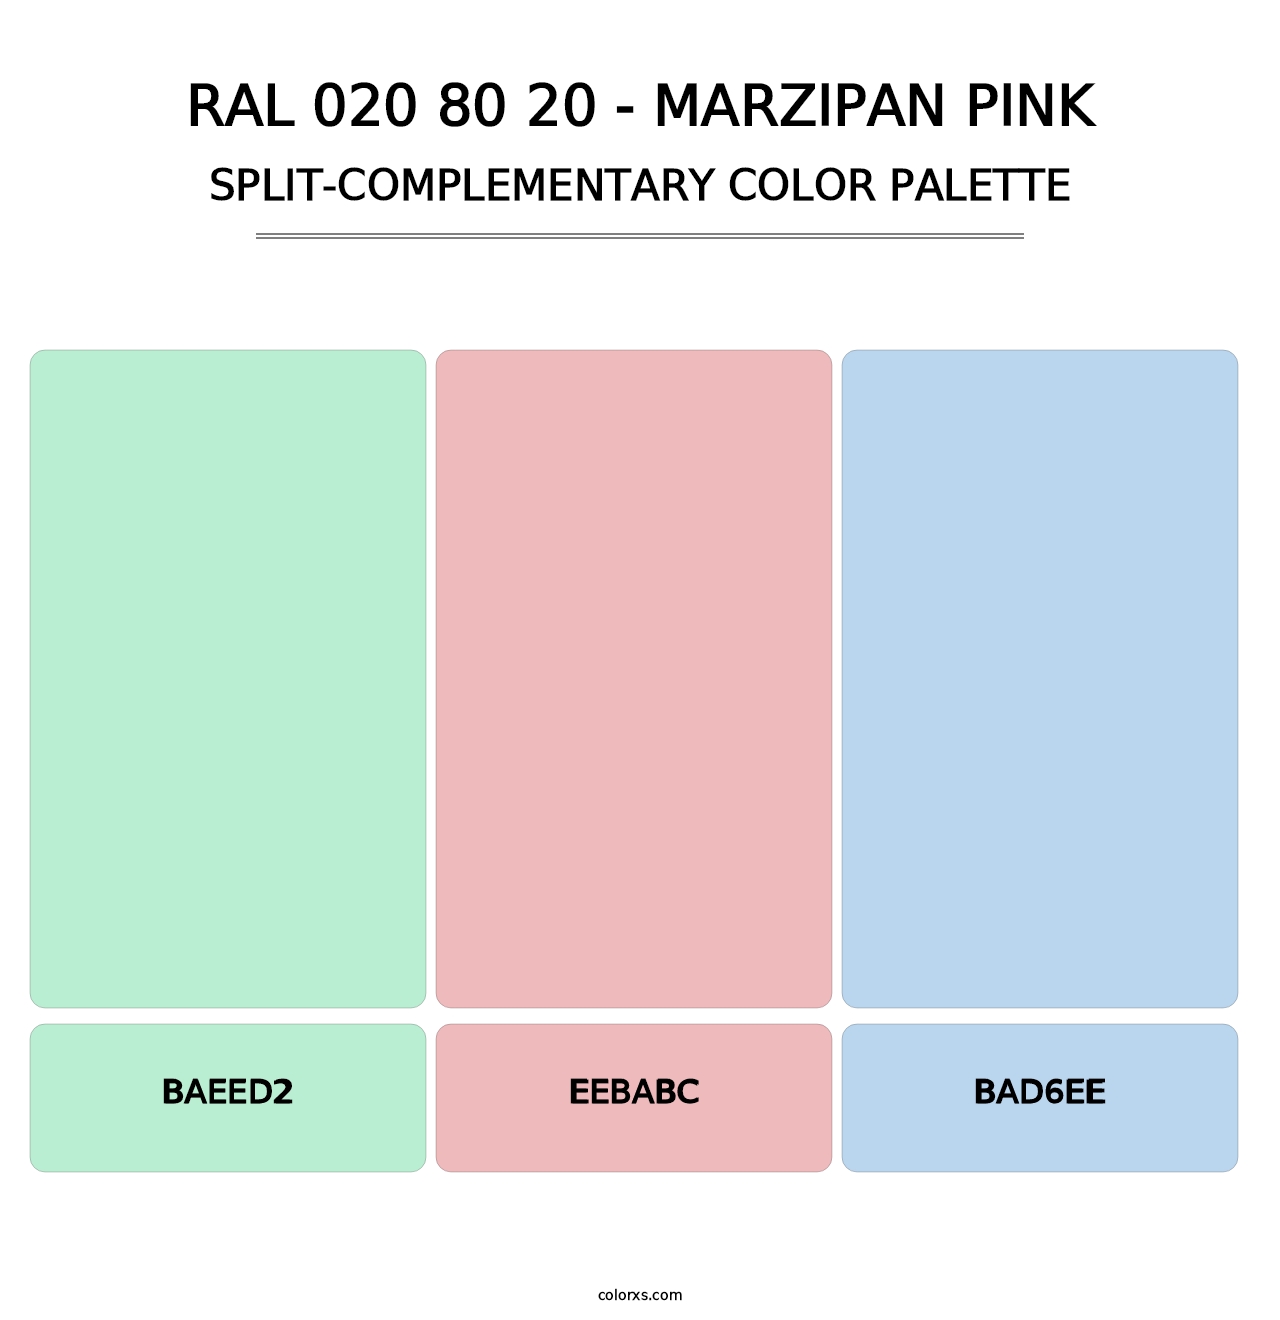 RAL 020 80 20 - Marzipan Pink - Split-Complementary Color Palette